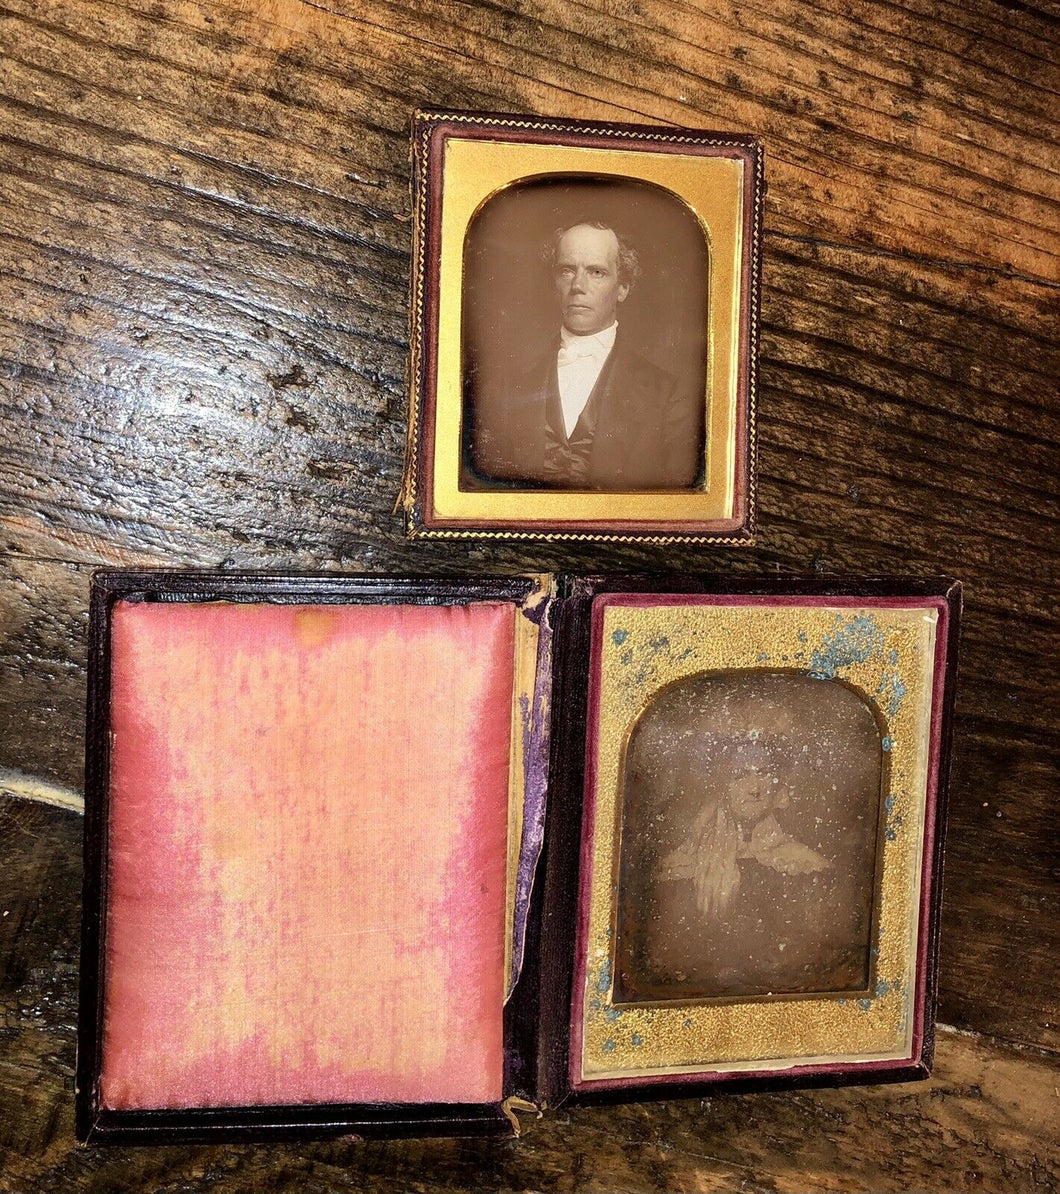 Two Daguerreotypes 1840s, 1850s 1/4 Plate Painting + Sealed 1/6 Plate of a Man